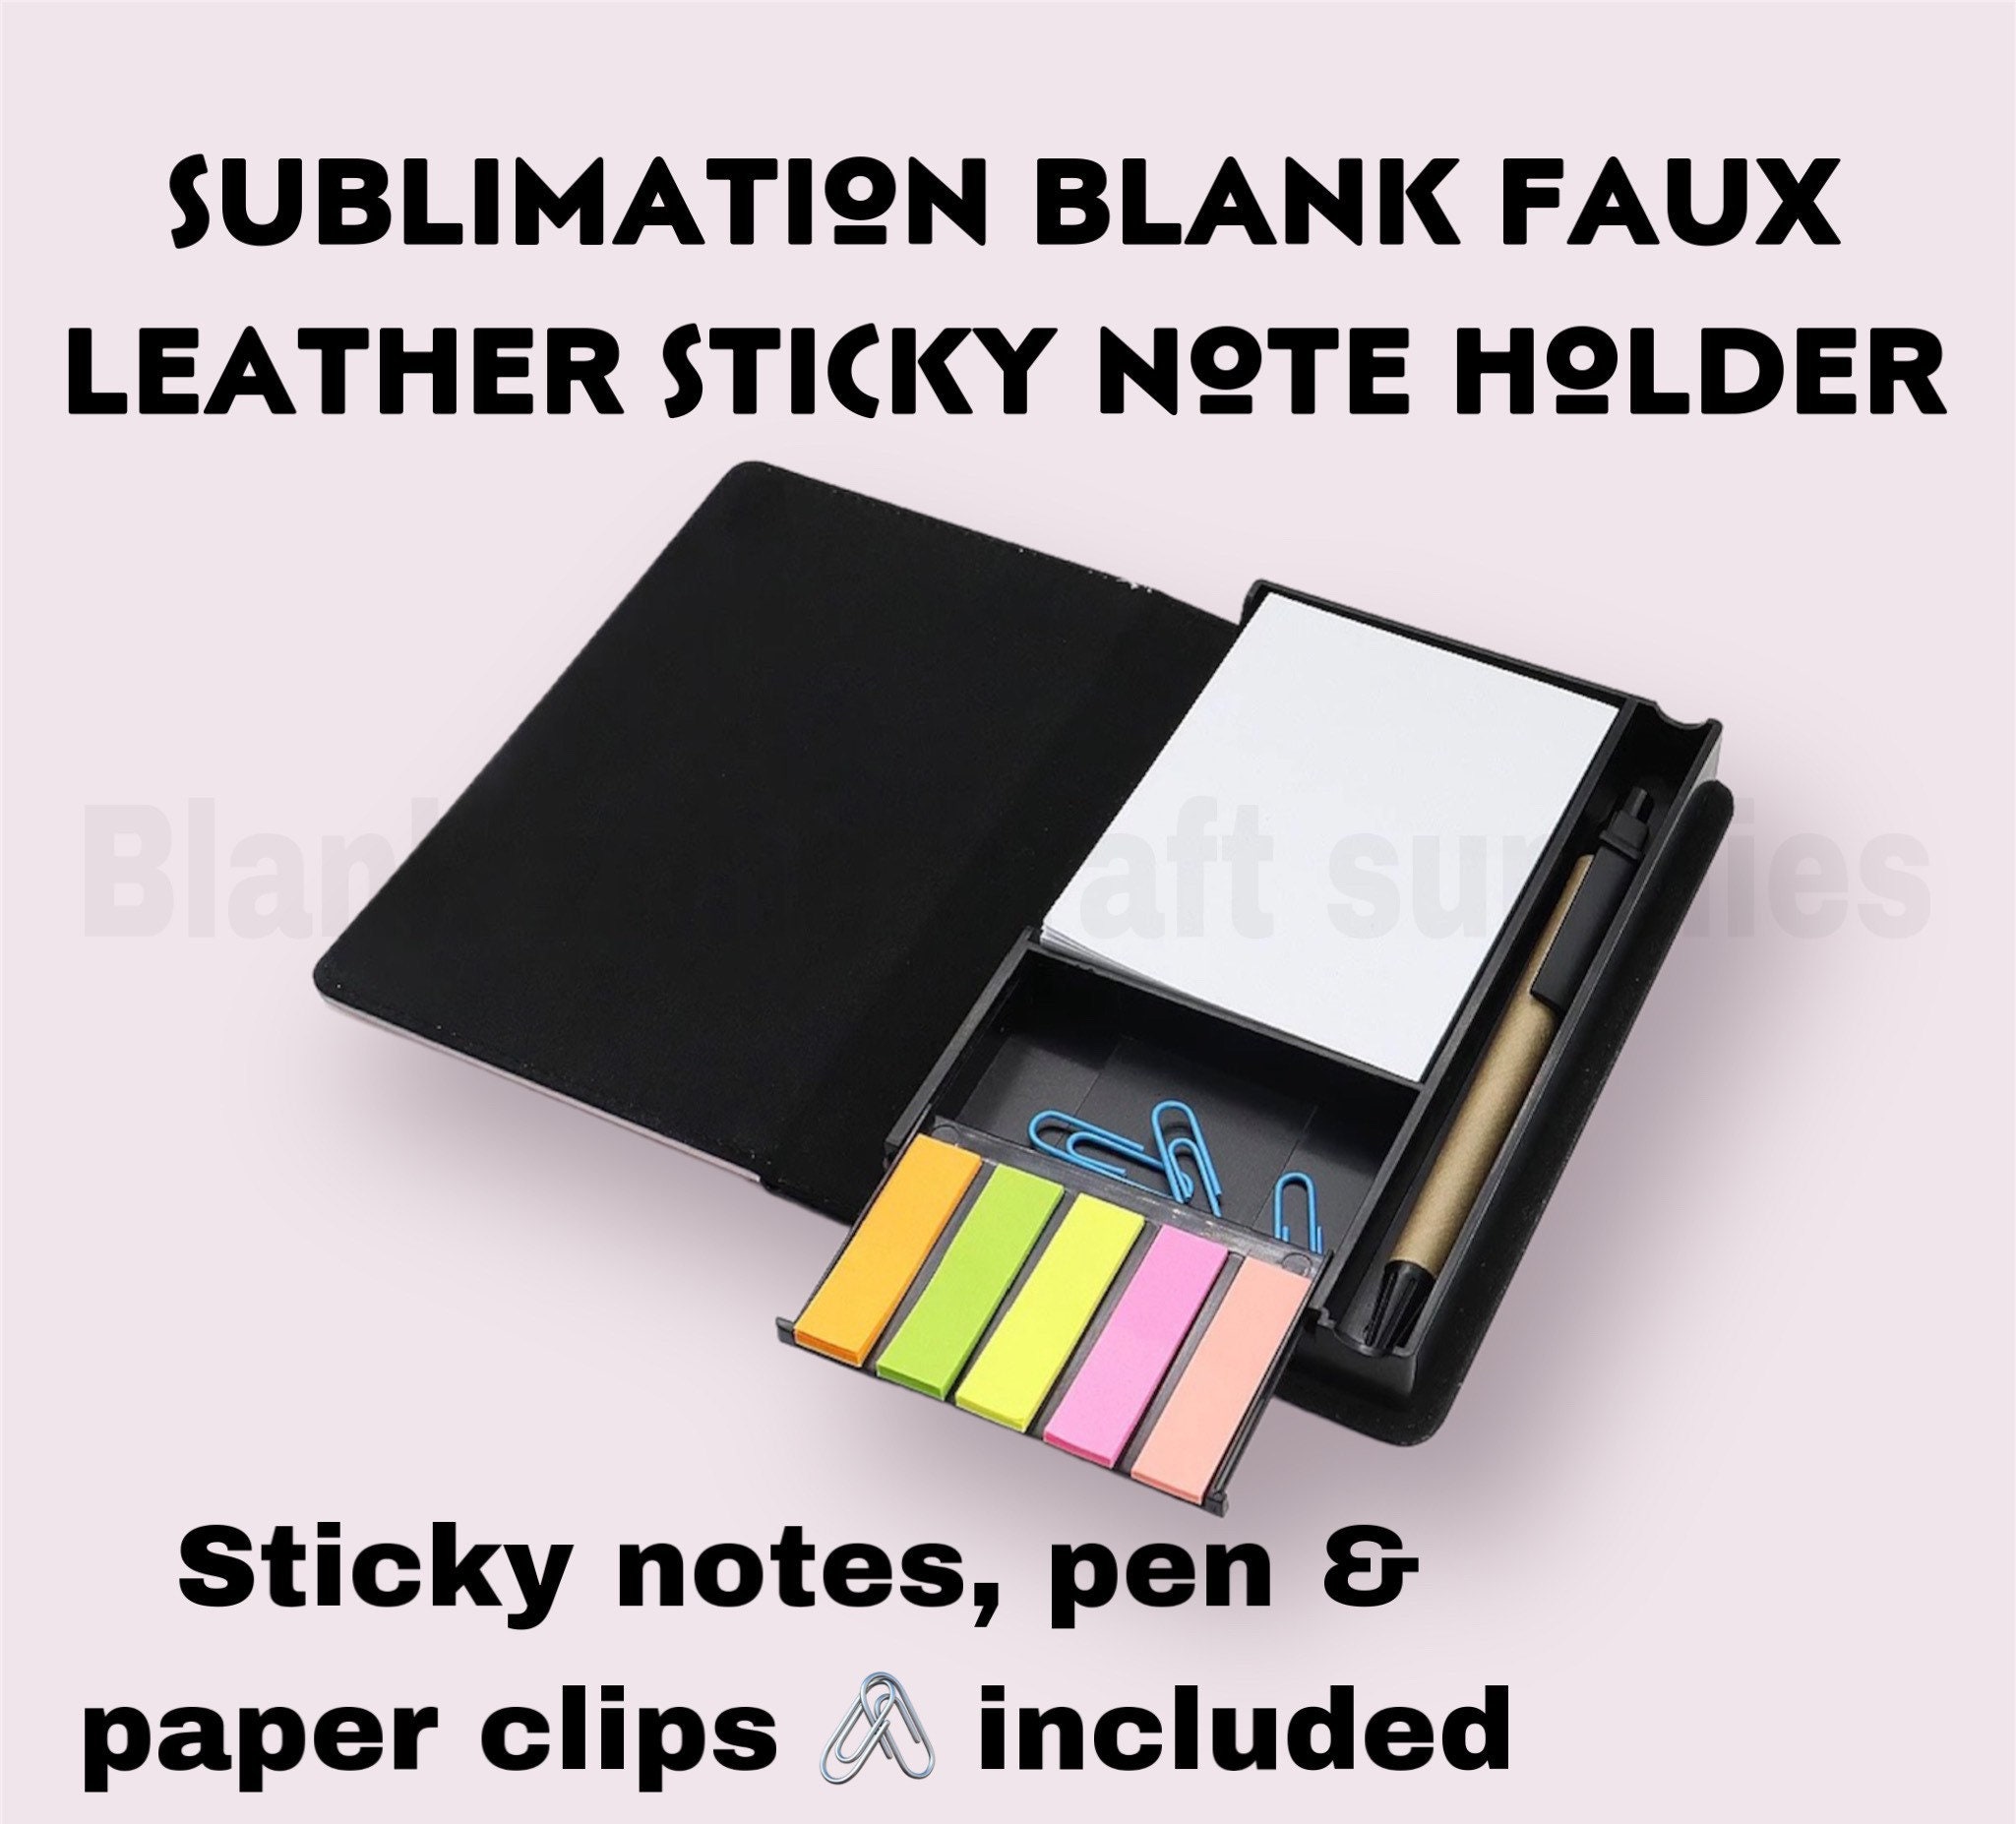 Dye Sublimation Blank Imprintable Leather Notebook. Call LRi Today